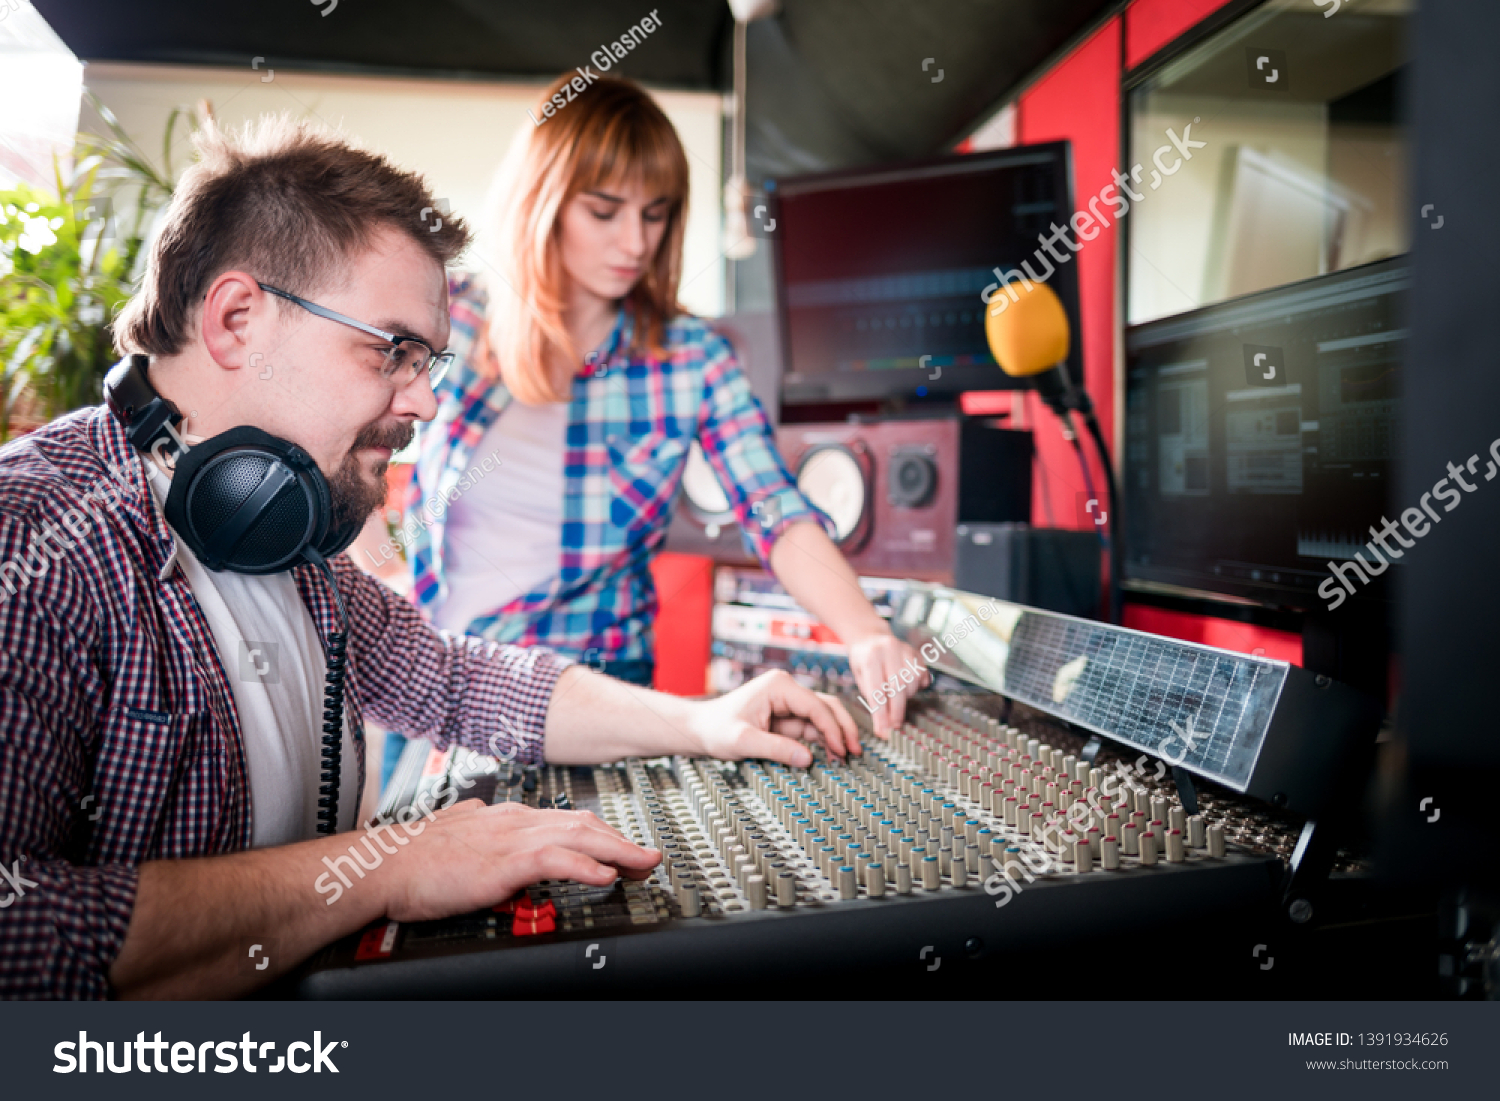 Music producer and musician in recording studio using soundboard for mixing sound #1391934626